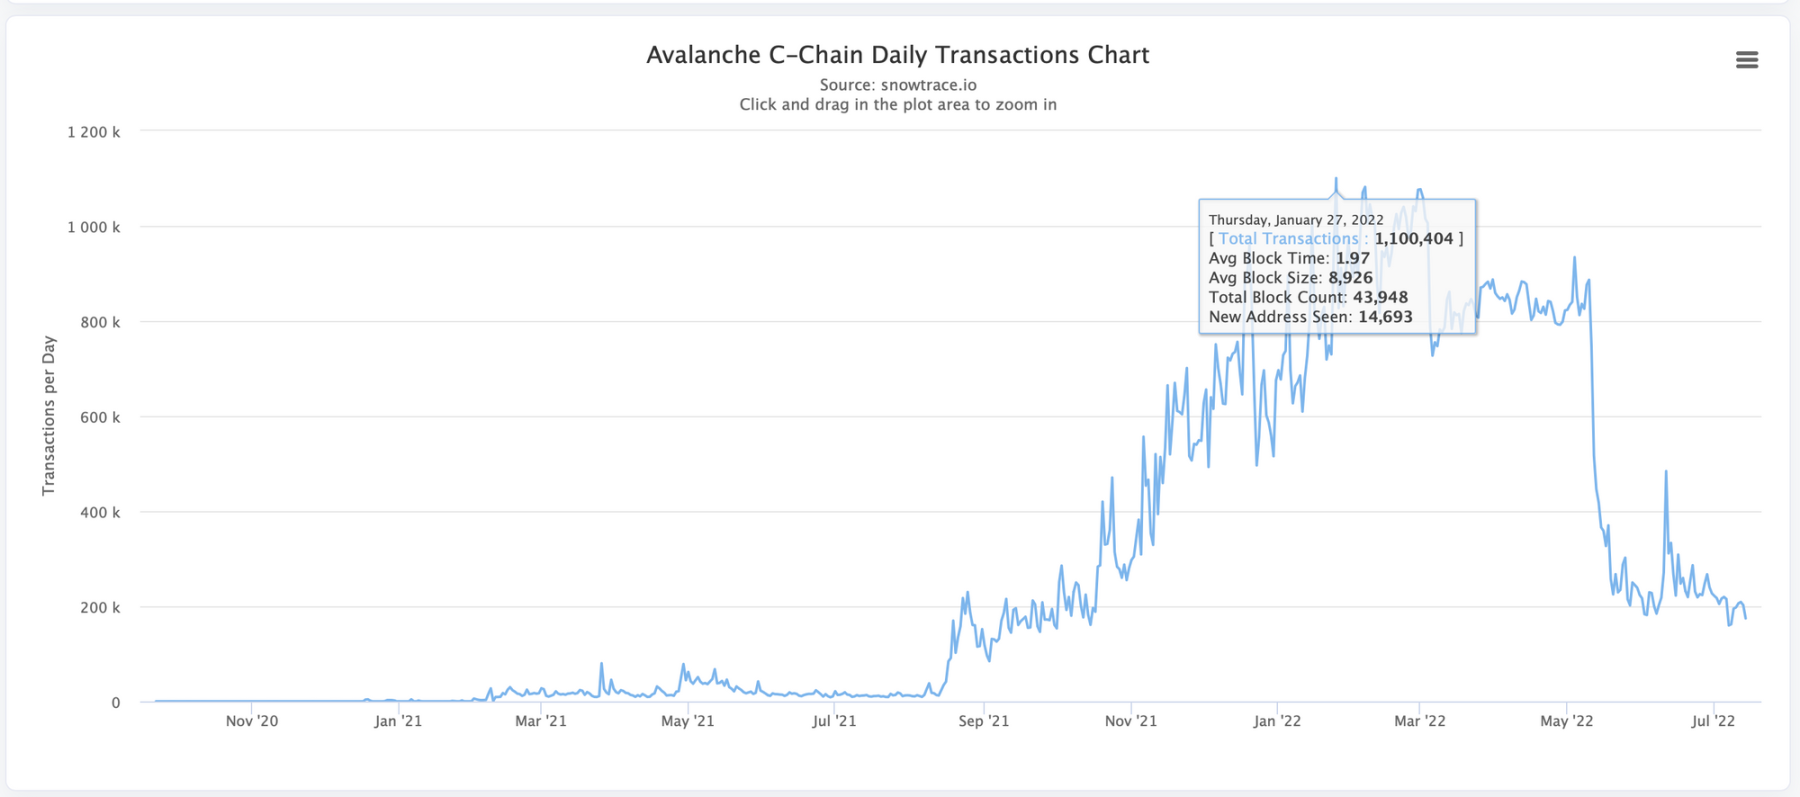 Avalanche C-Chain Daily Transactions Chart